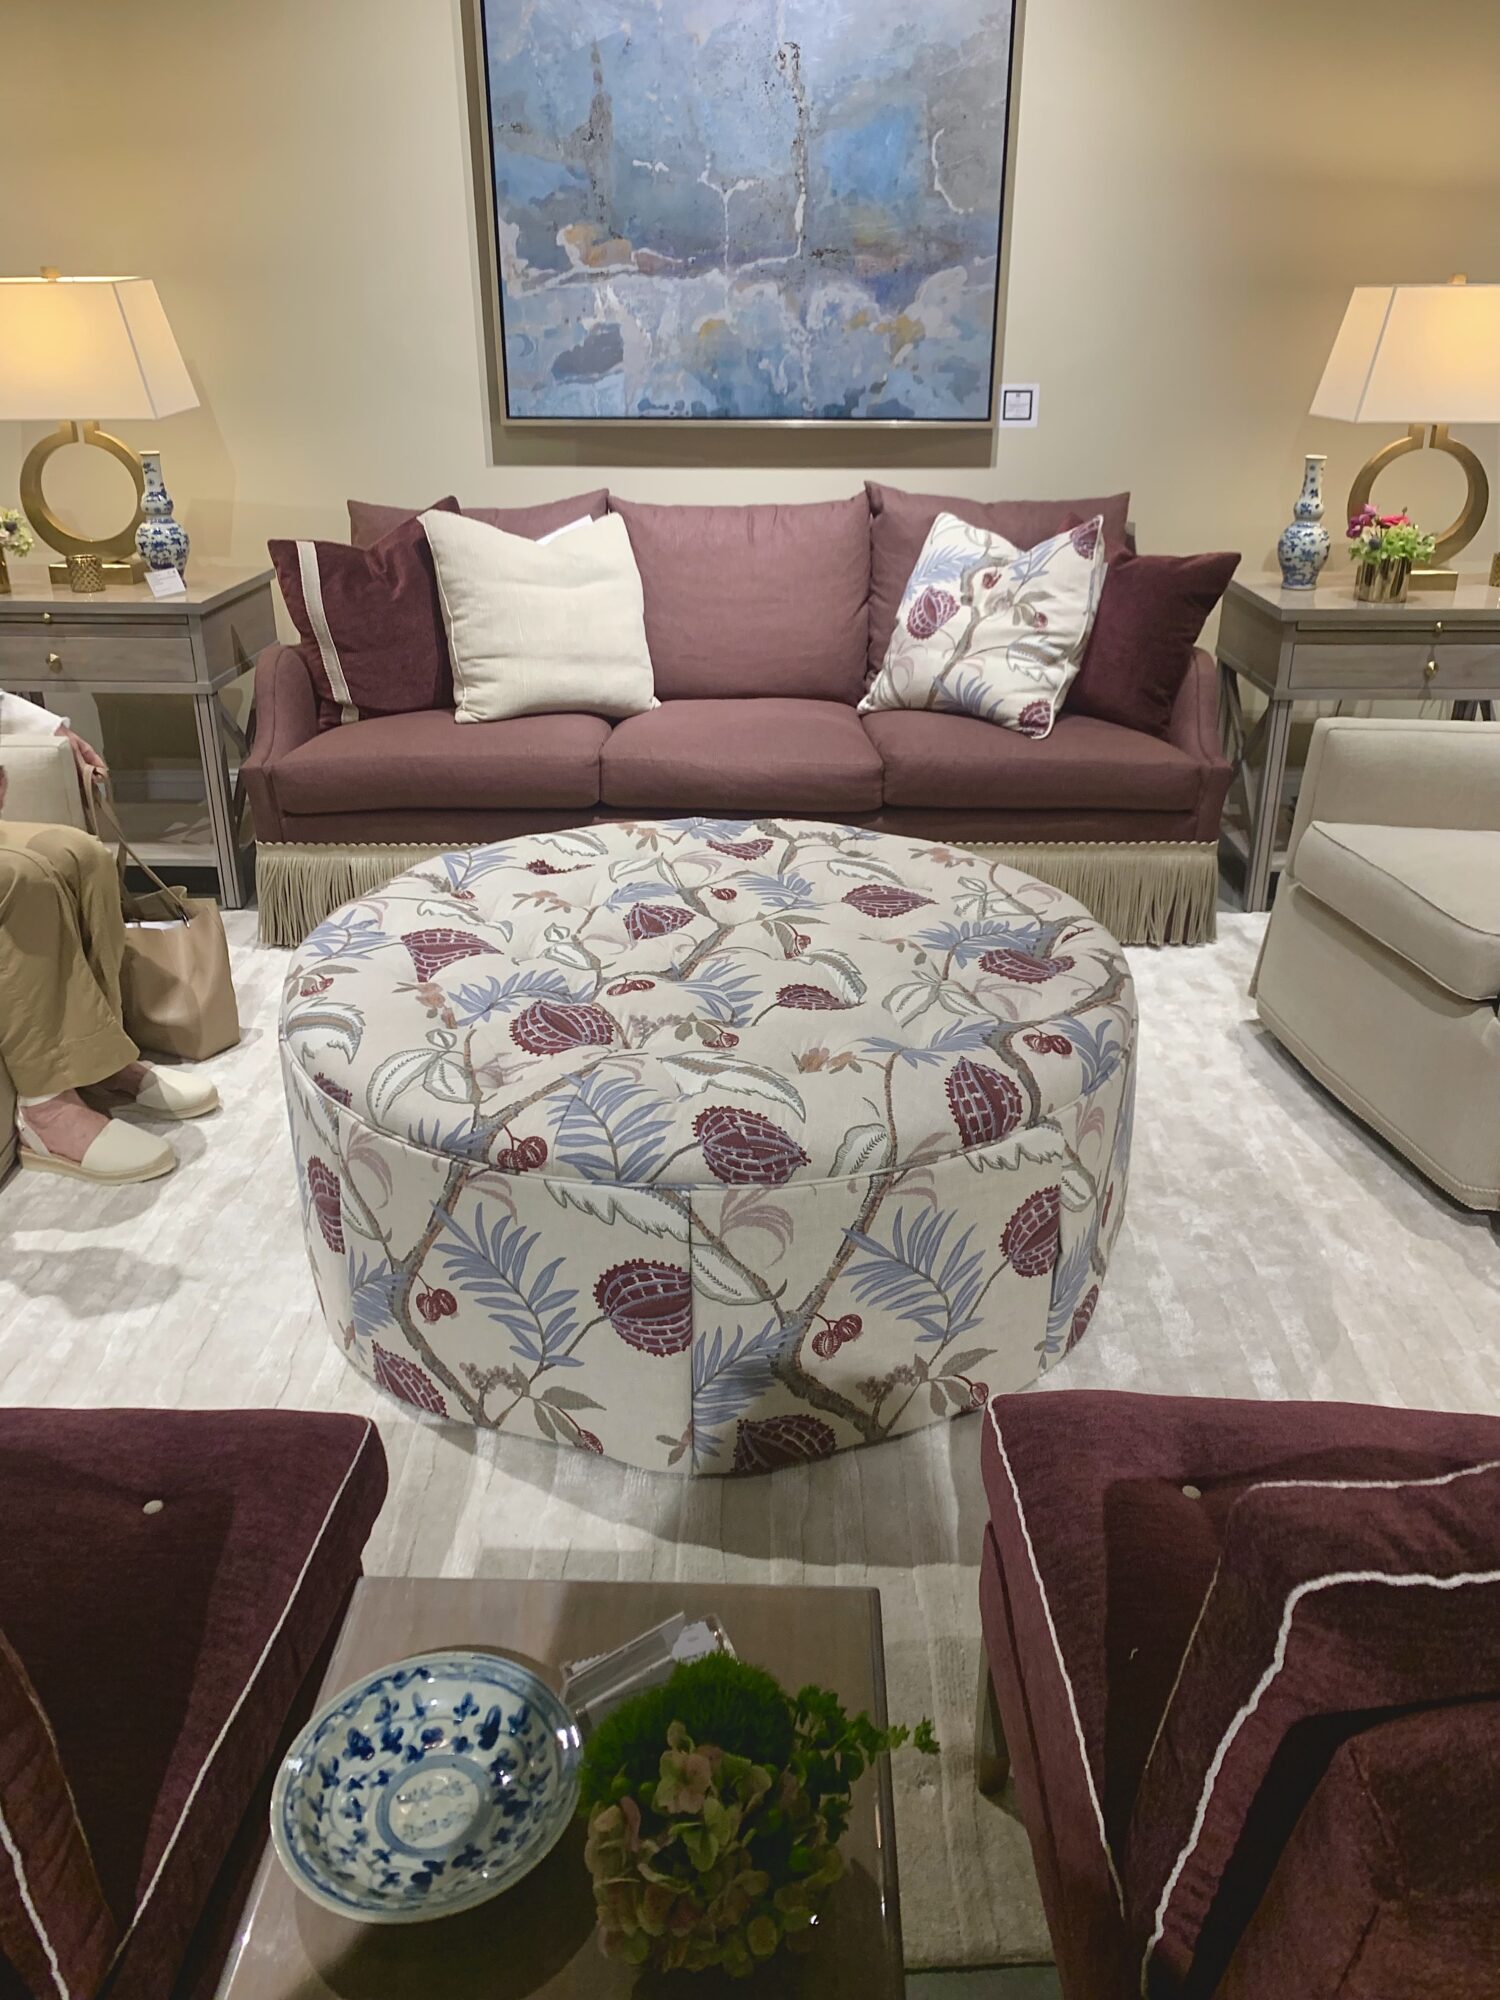 Living room seating group with large floral ottoman, plum-colored sofa and plum-colored armless chairs